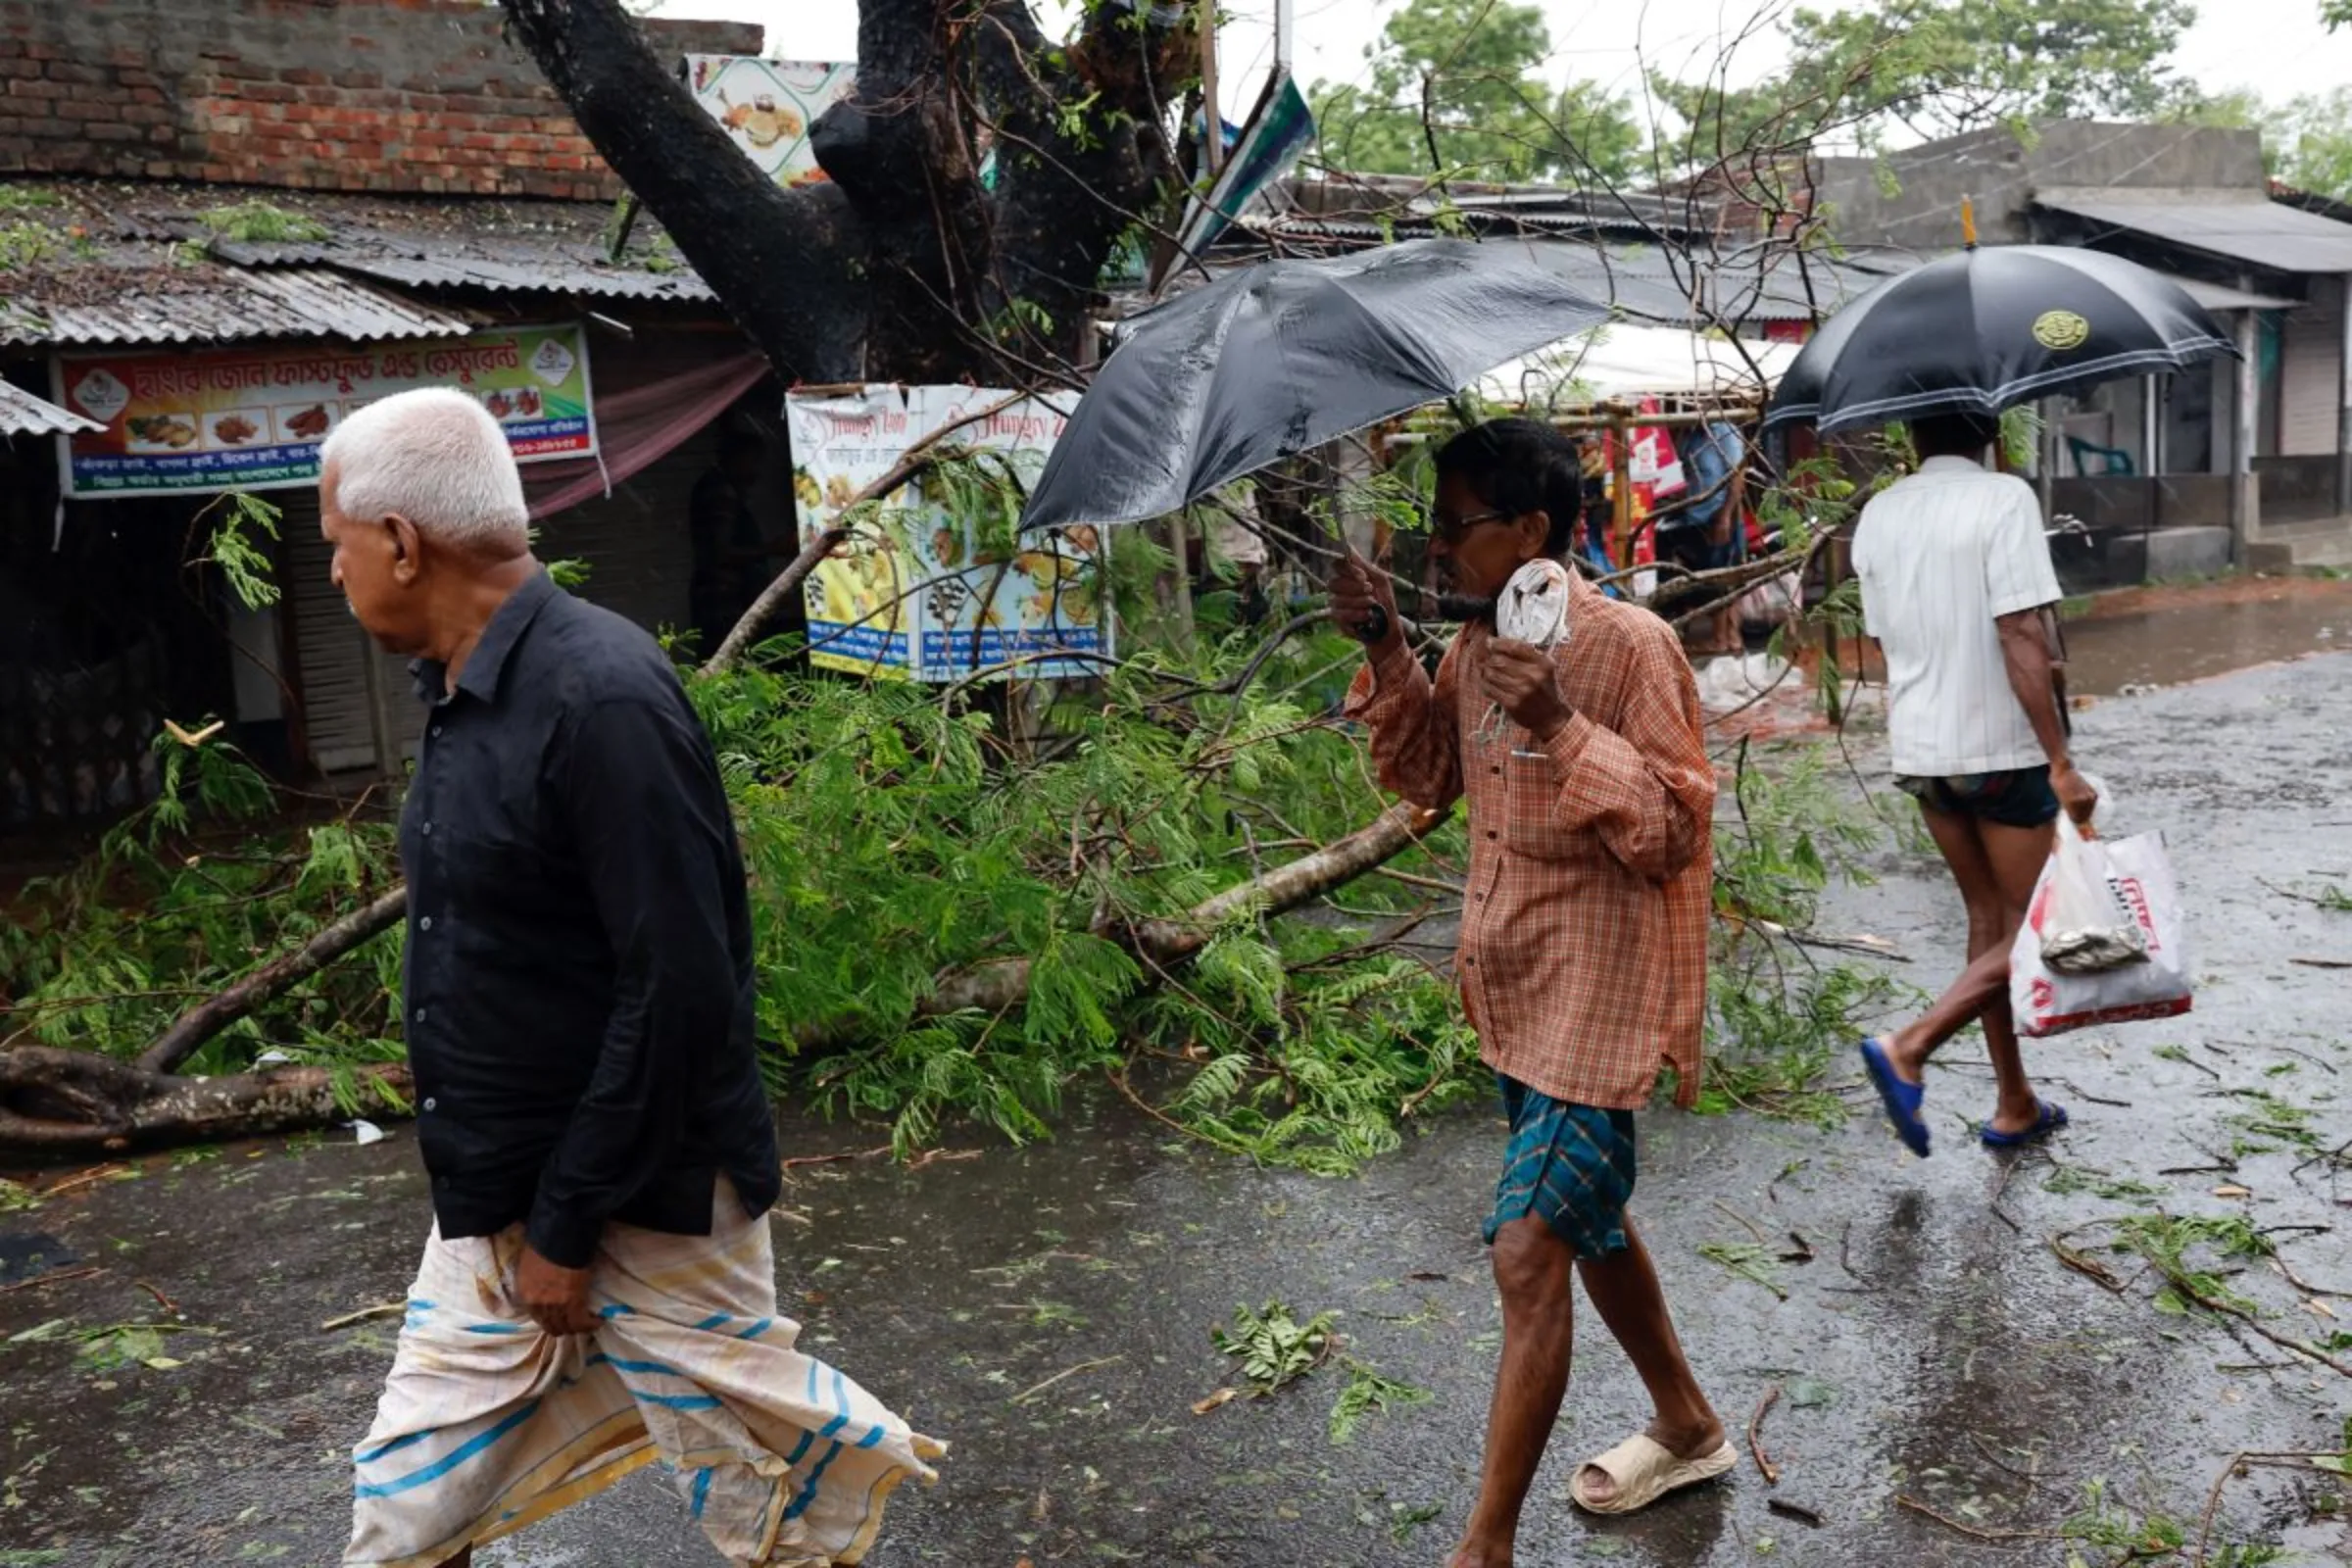 People walk past a fallen tree branch as Cyclone Remal hits Bangladesh, May 27, 2024. REUTERS/Mohammad Ponir Hossain